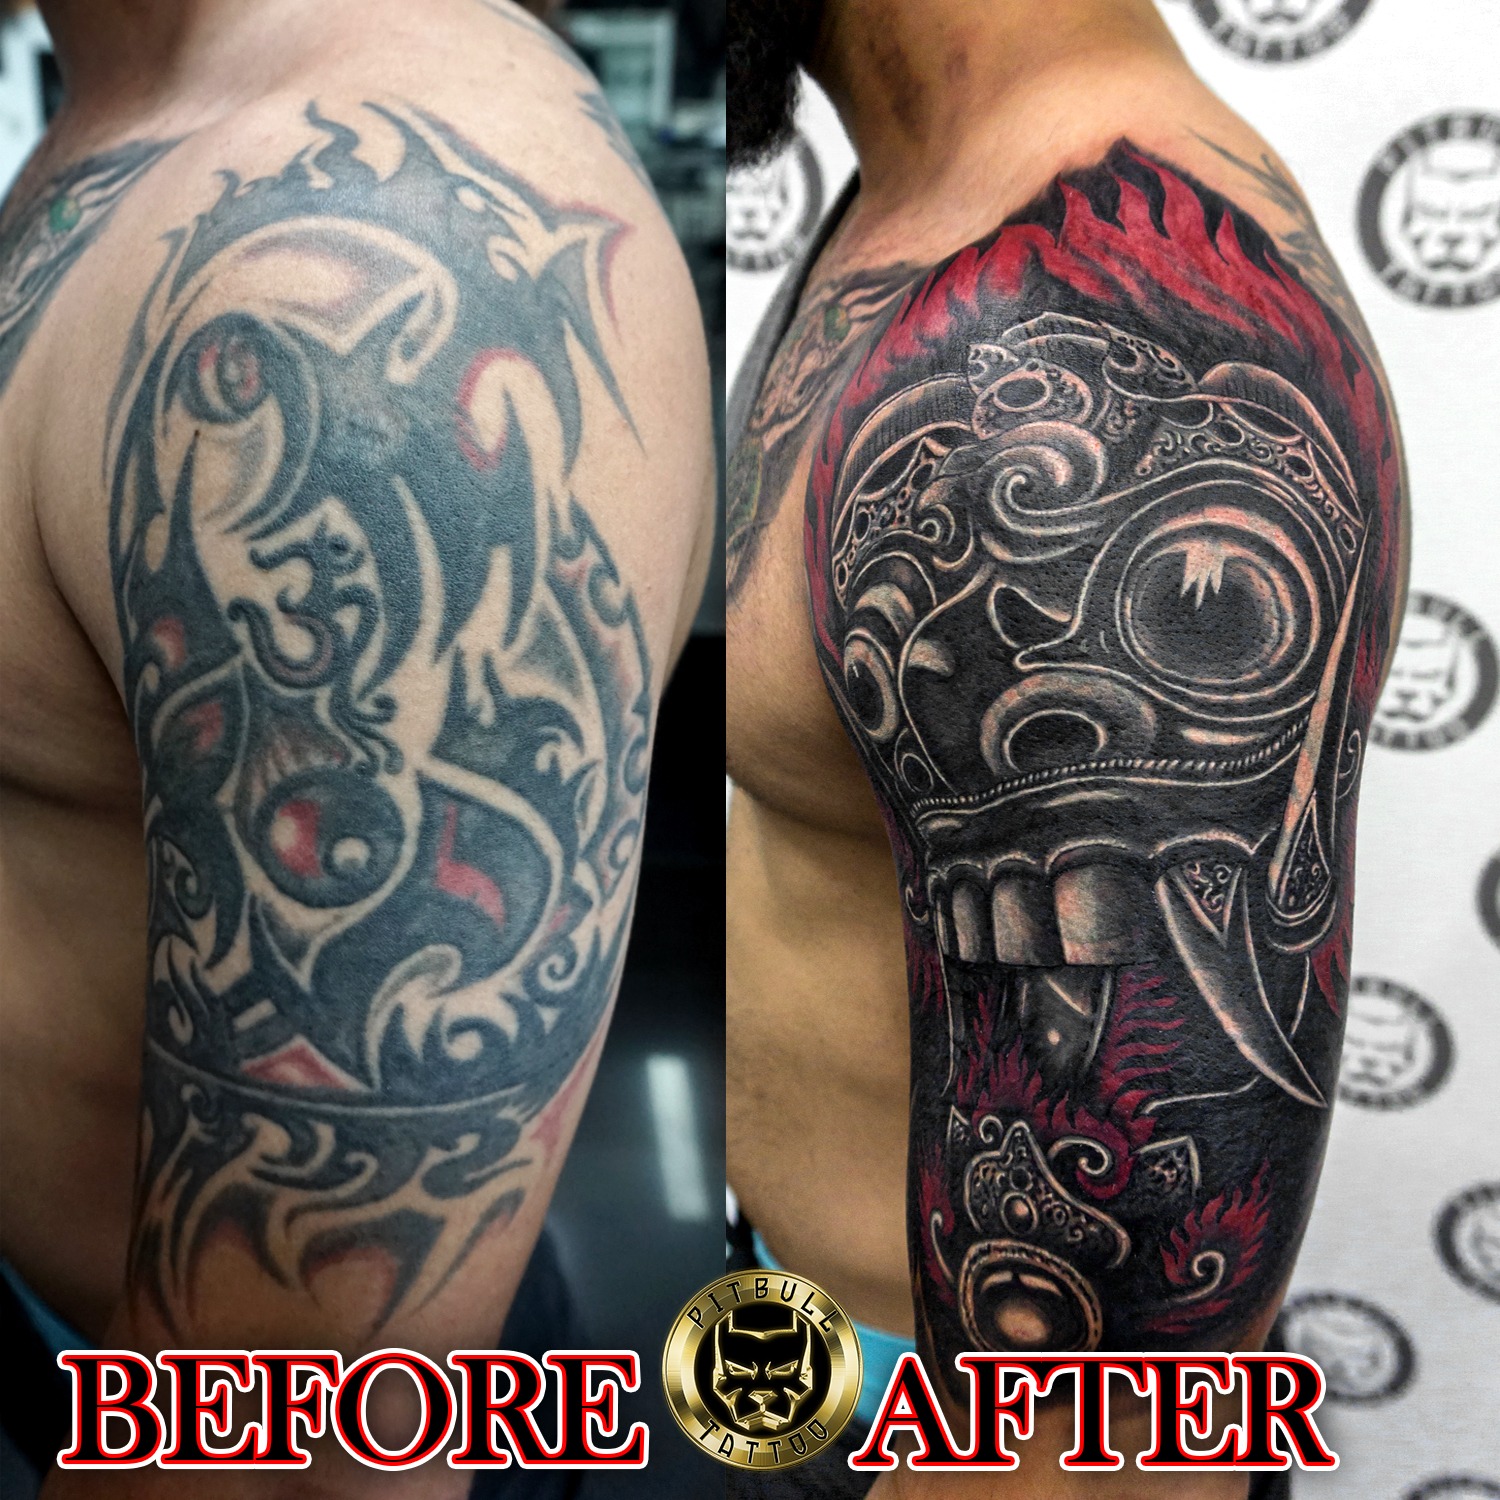 Cover Up Specialization Arm